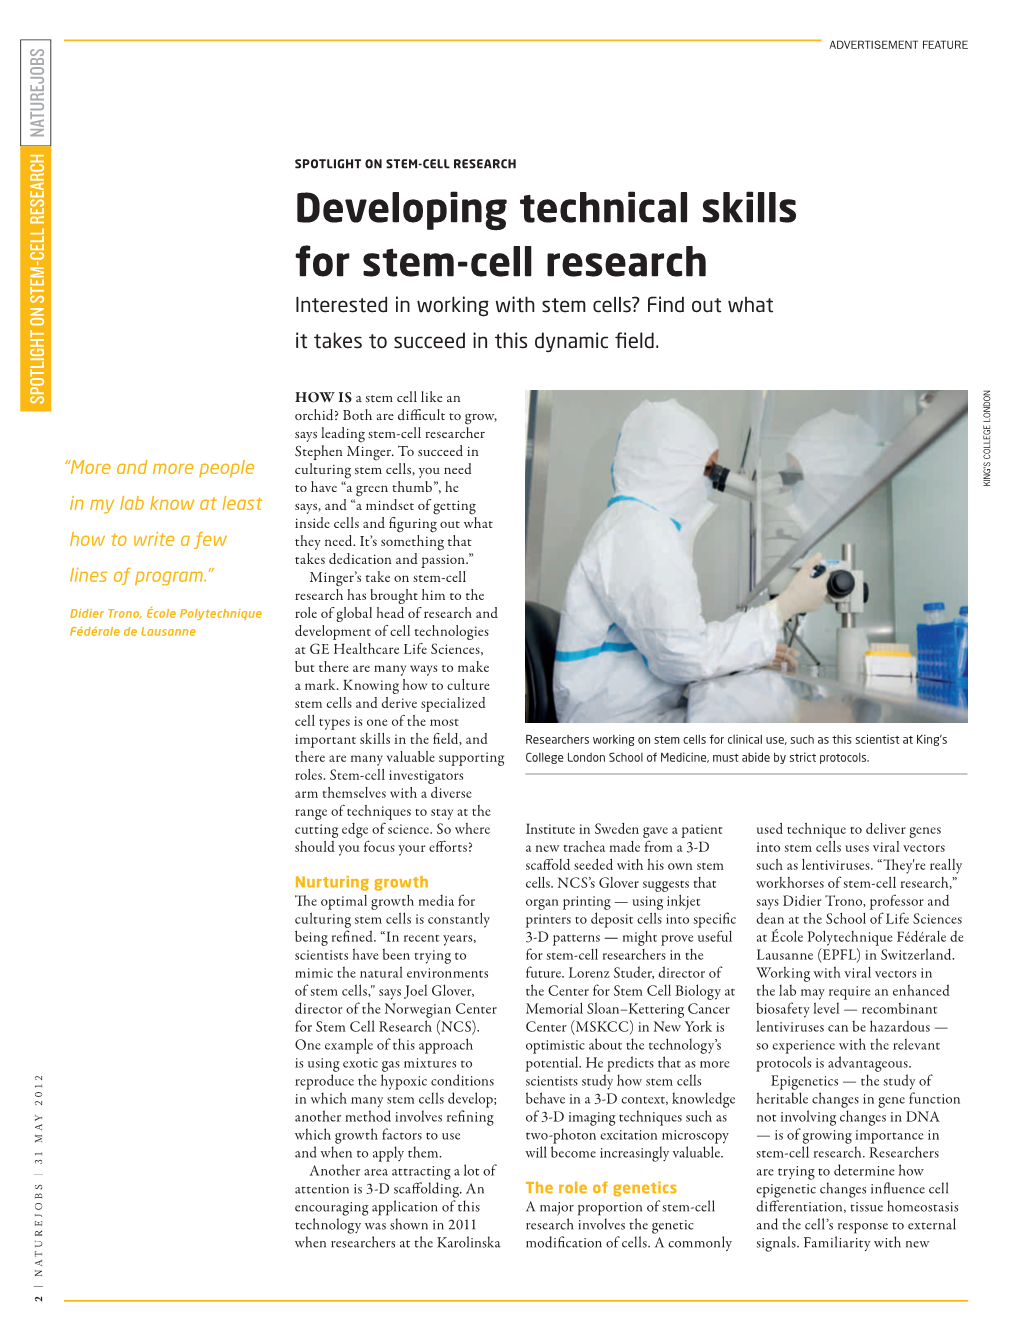 Developing Technical Skills for Stem-Cell Research